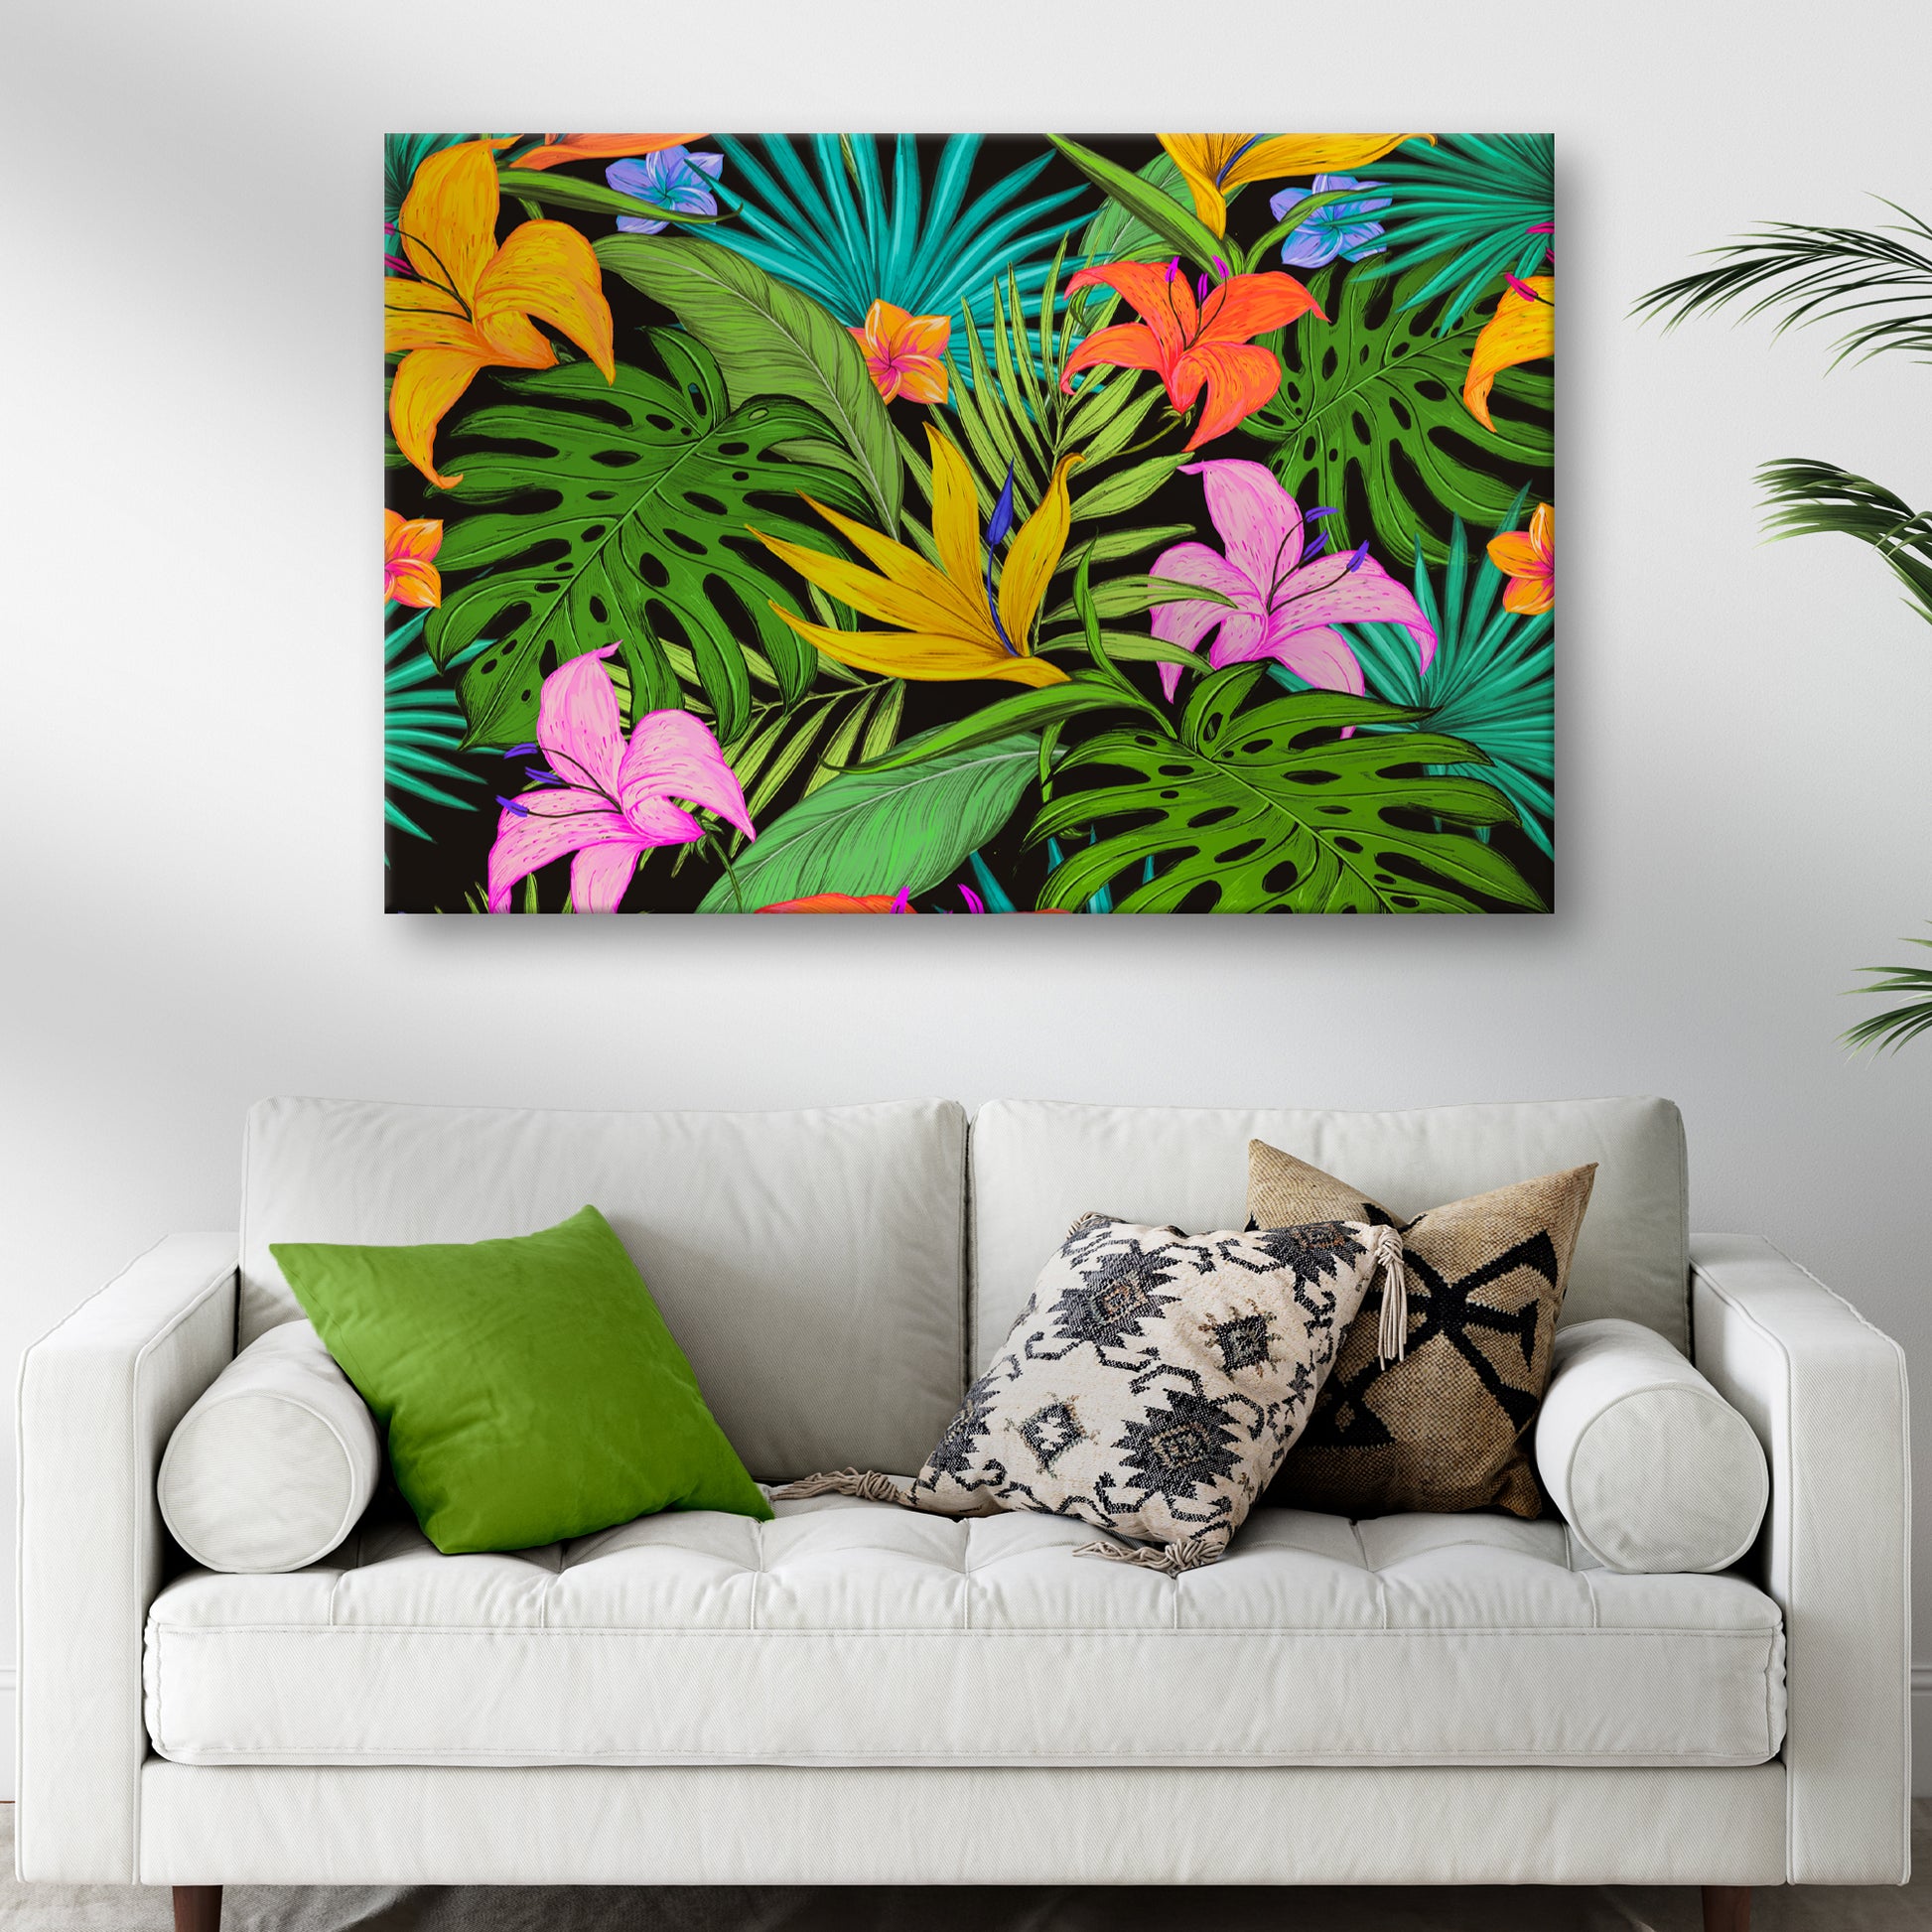 Colorful Tropical Plants Canvas Wall Art - Image by Tailored Canvases